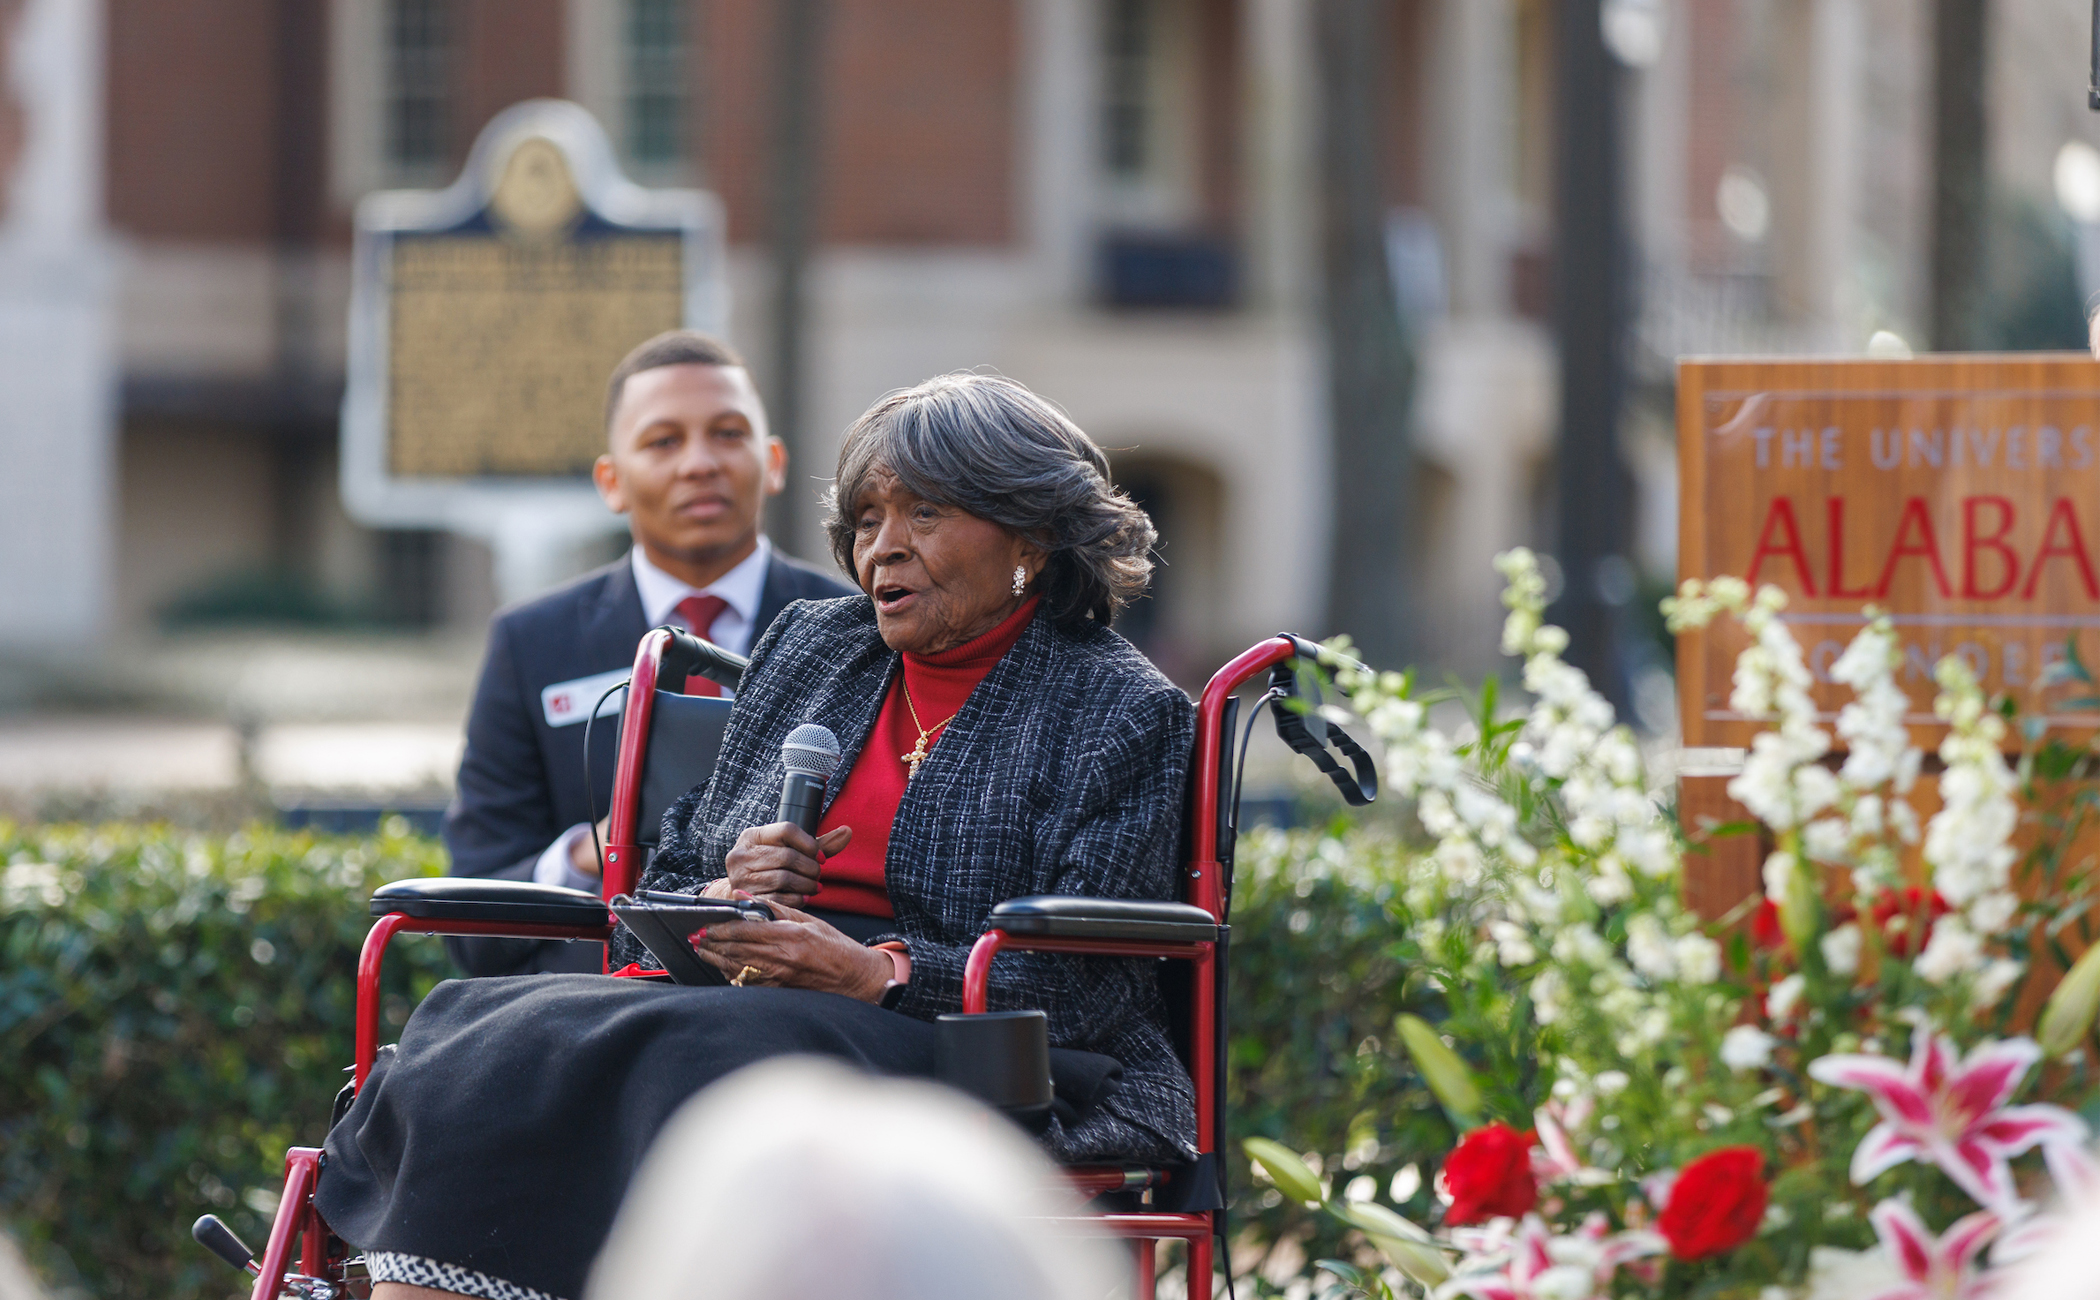 Autherine Lucy Foster speaking during the ceremony